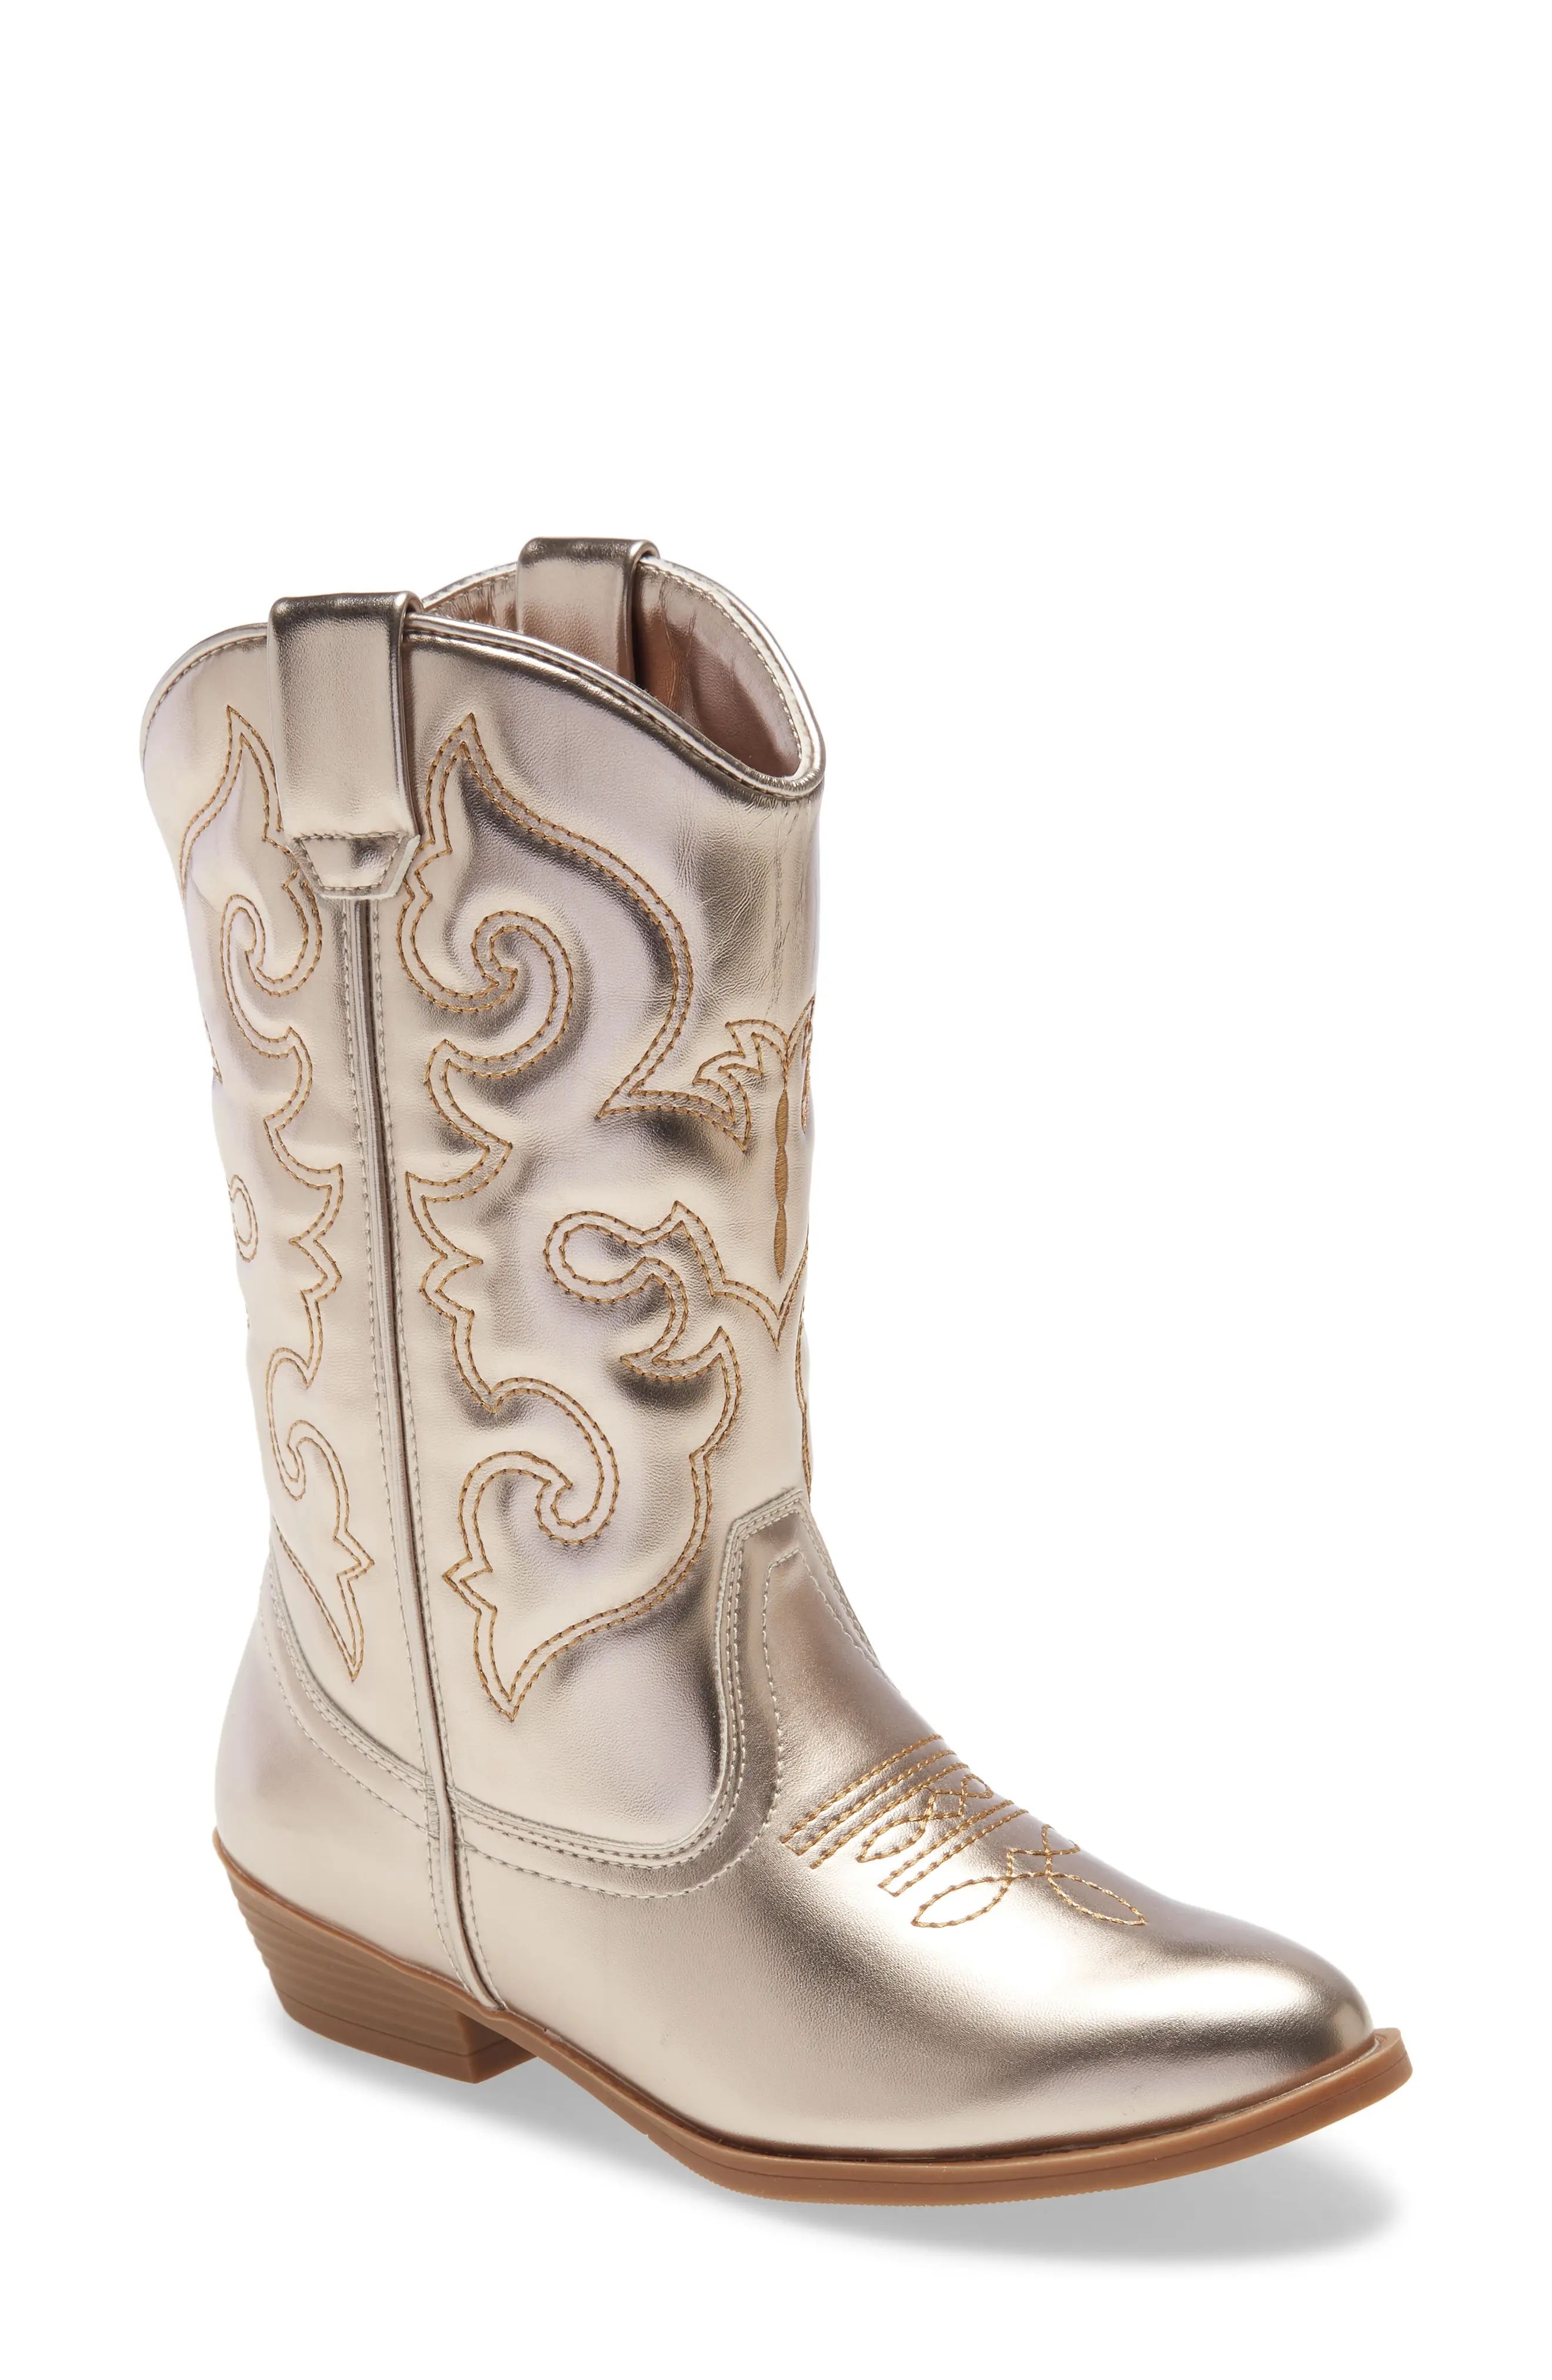 Tucker + Tate Cowboy Boot in Gold at Nordstrom, Size 5 M | Nordstrom